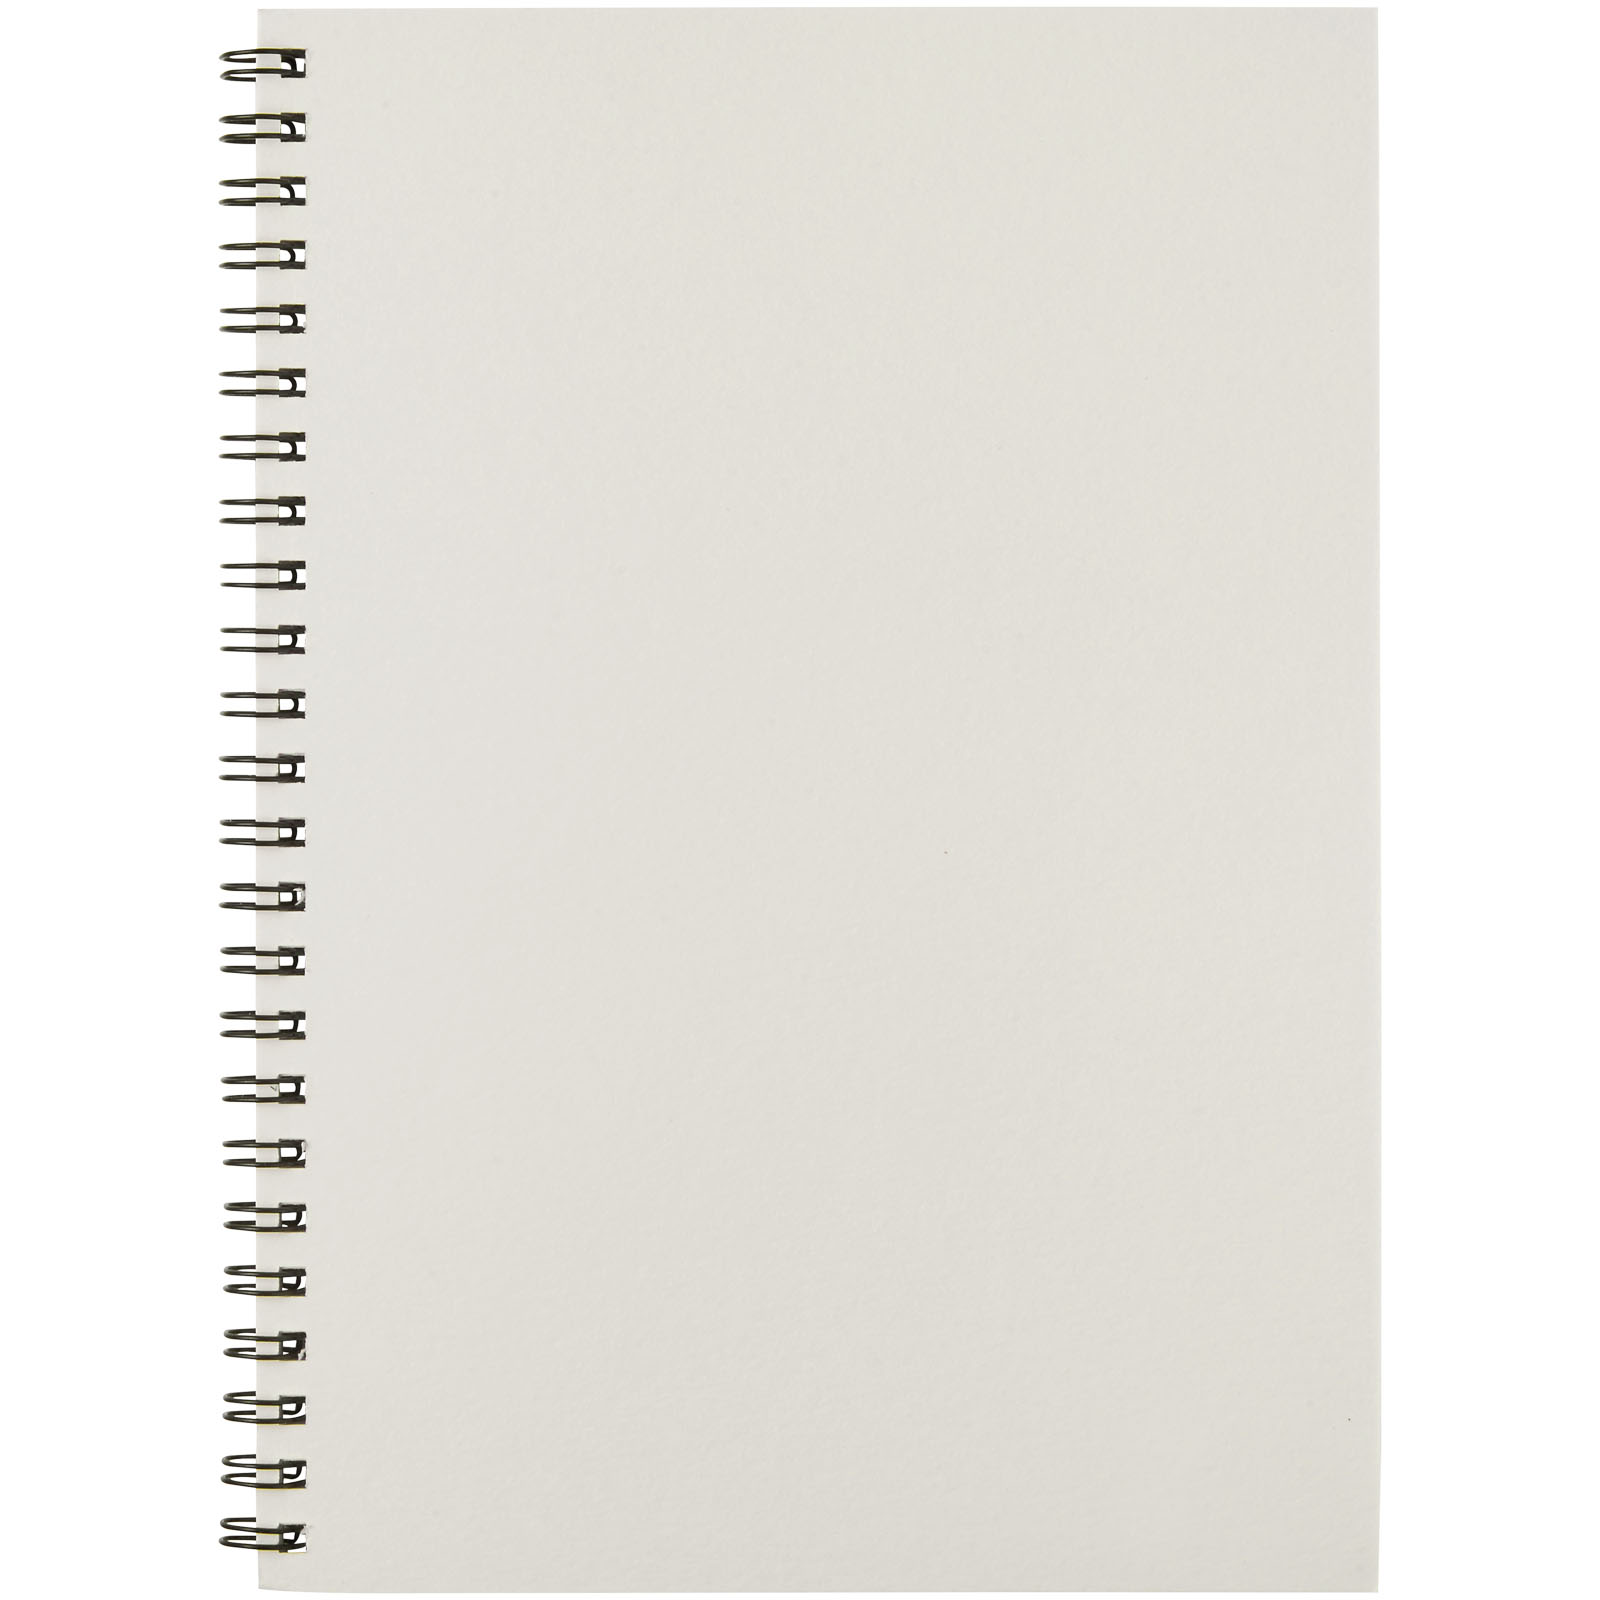 Advertising Soft cover notebooks - Desk-Mate® A5 colour spiral notebook - 1